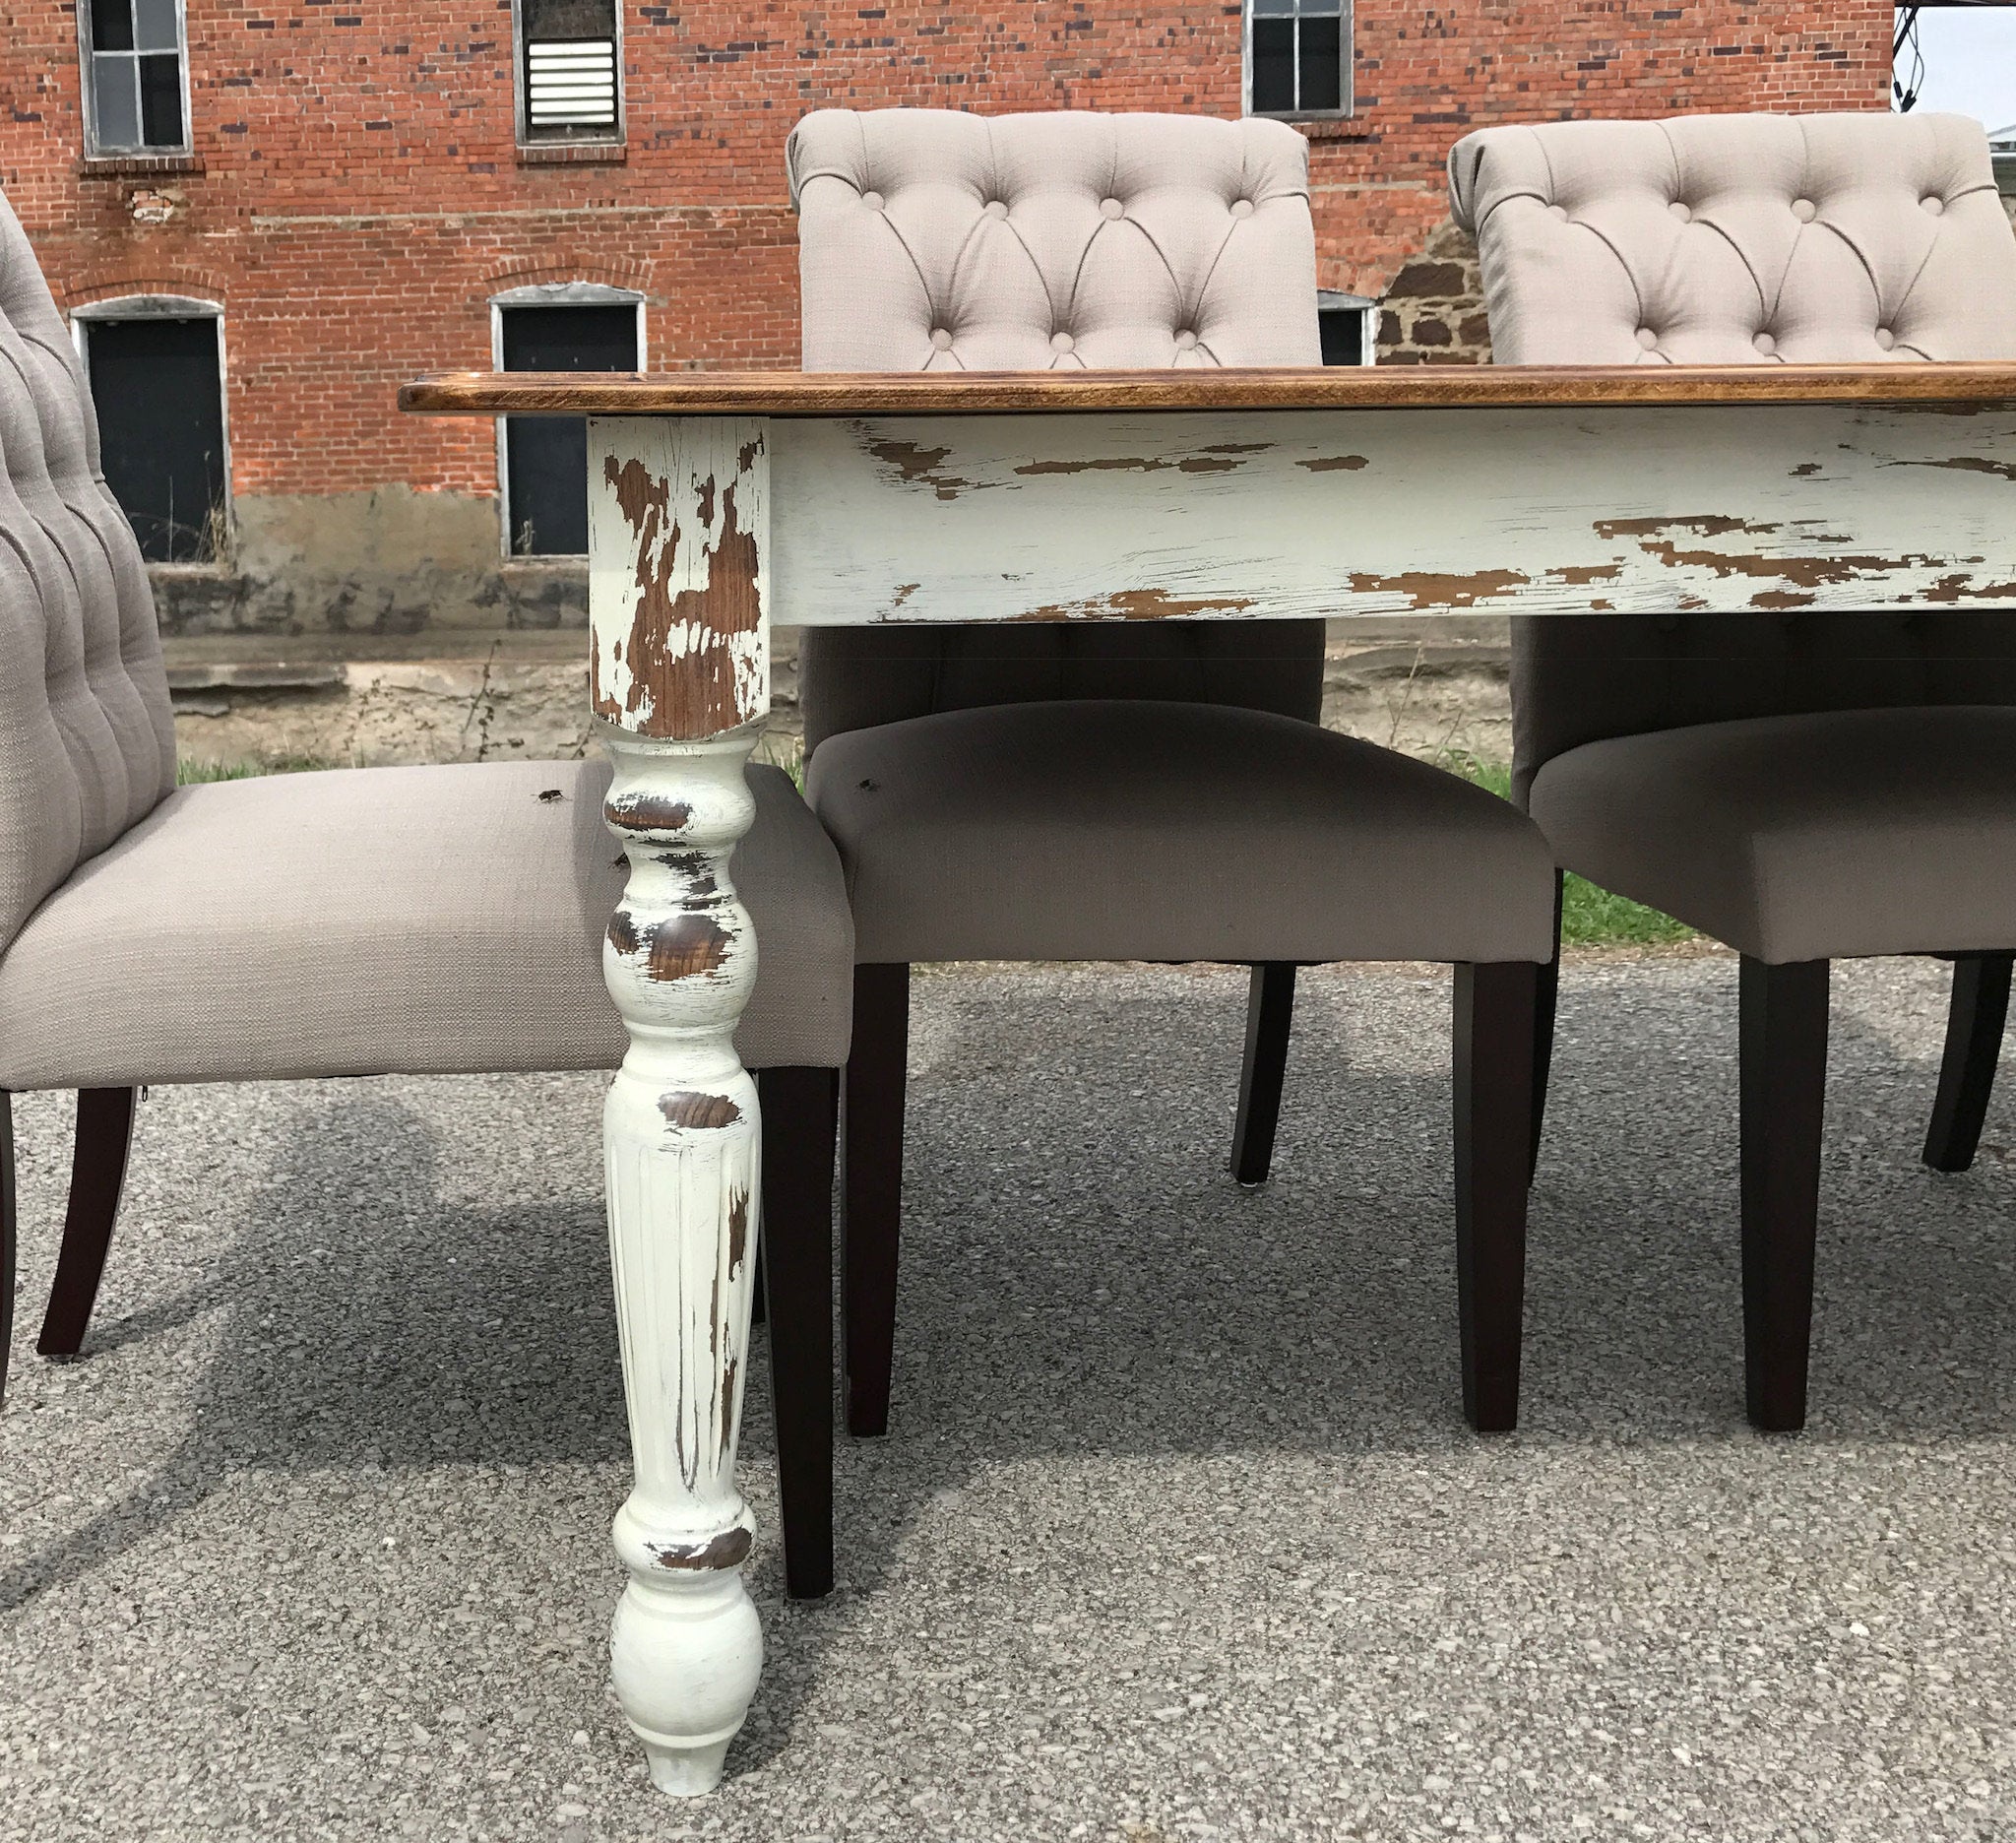 Farmhouse Dining Table with White Distressed Legs and Stained Top